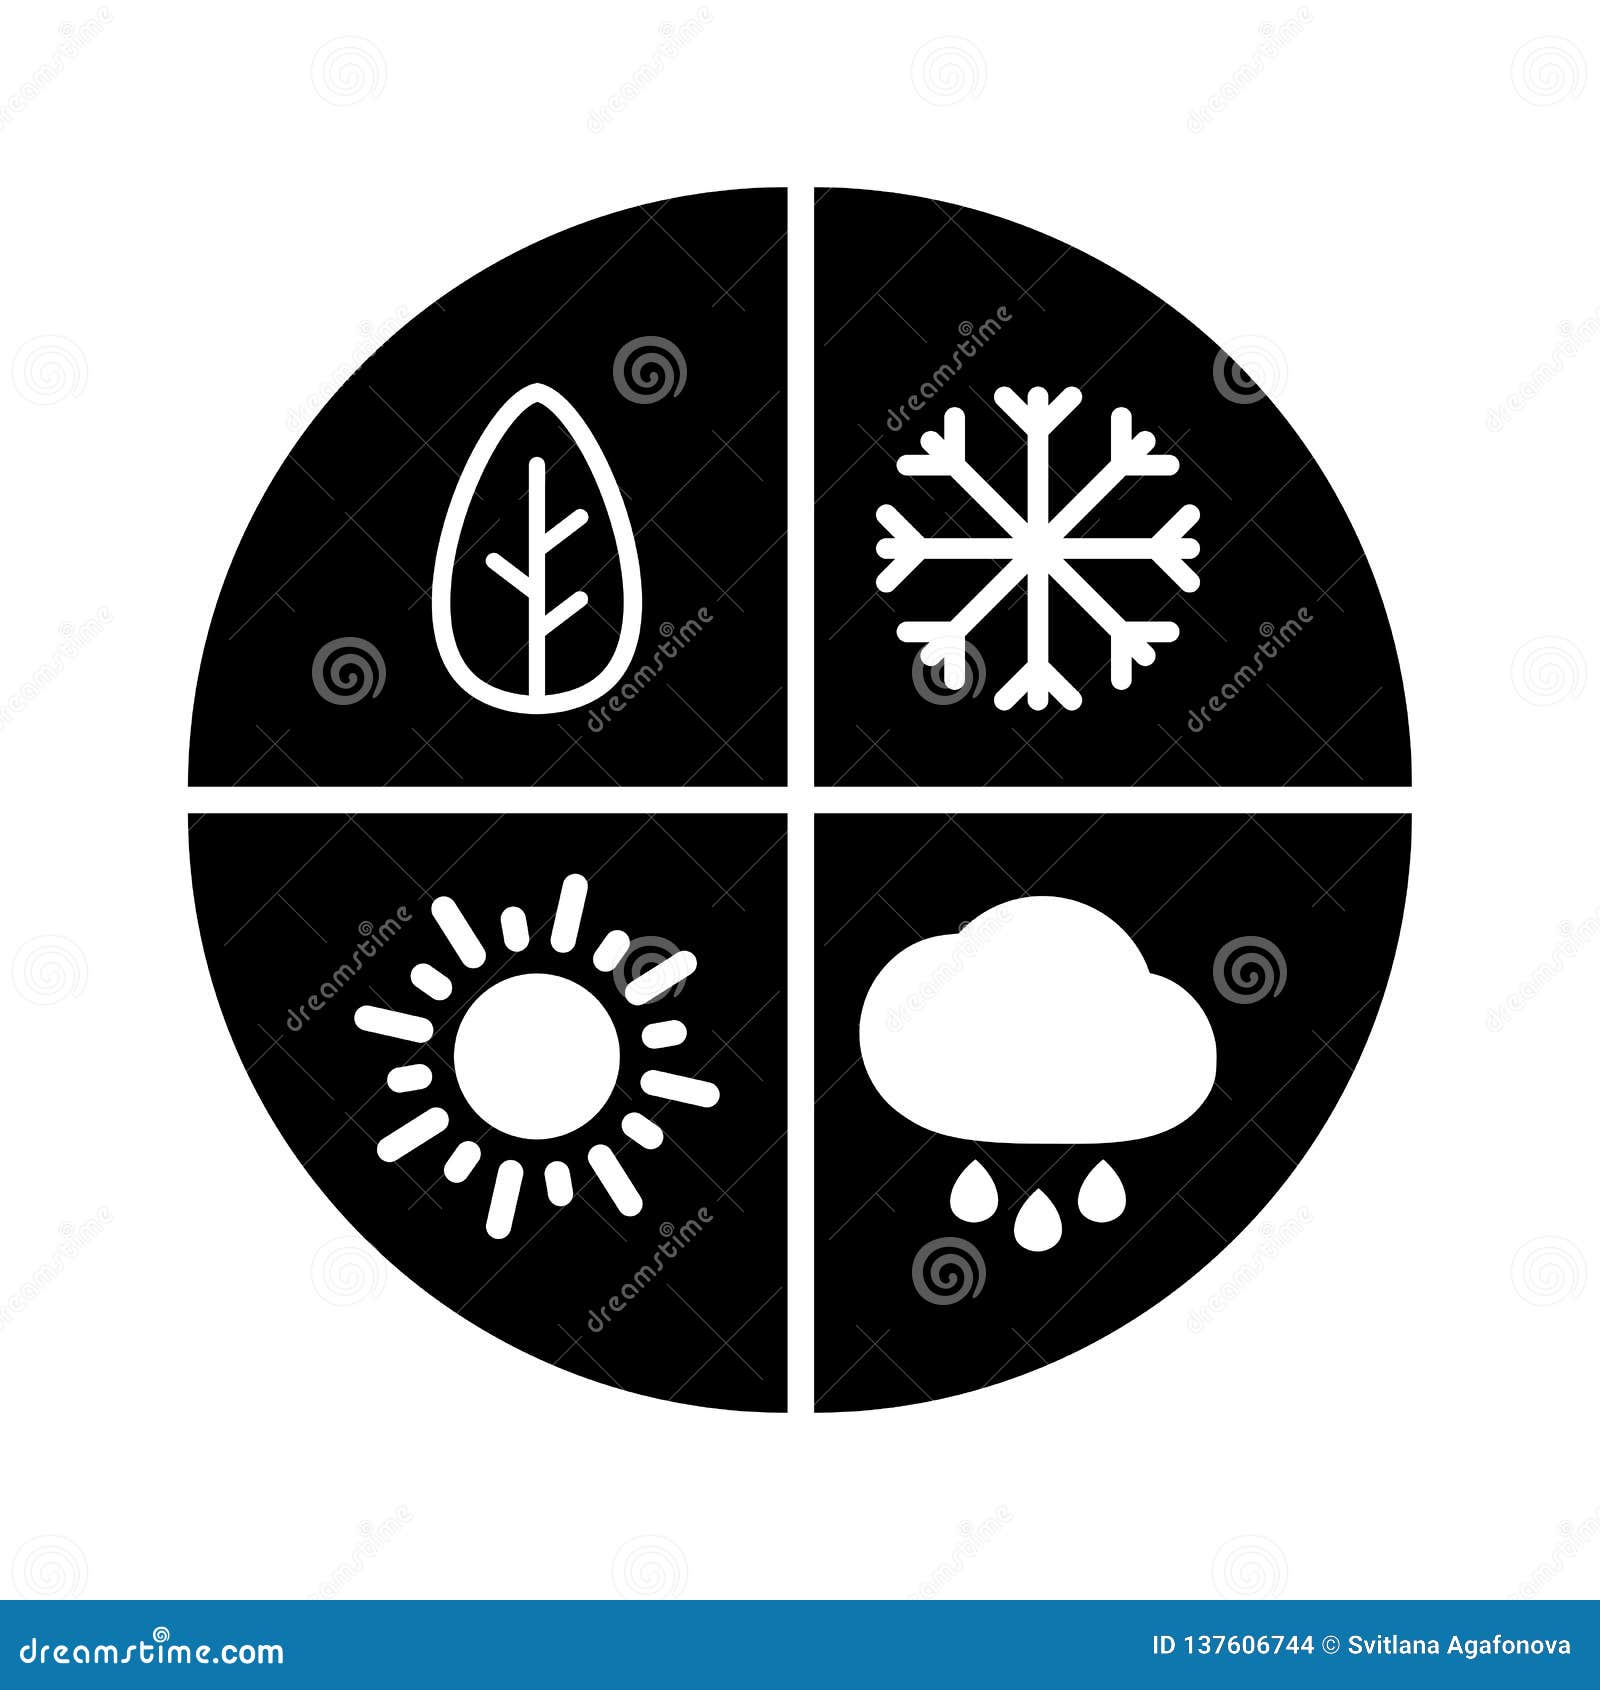 graphic black flat  all four seasons icon . winter, spring, summer, autumn - all year round sign. snow, rain and sun